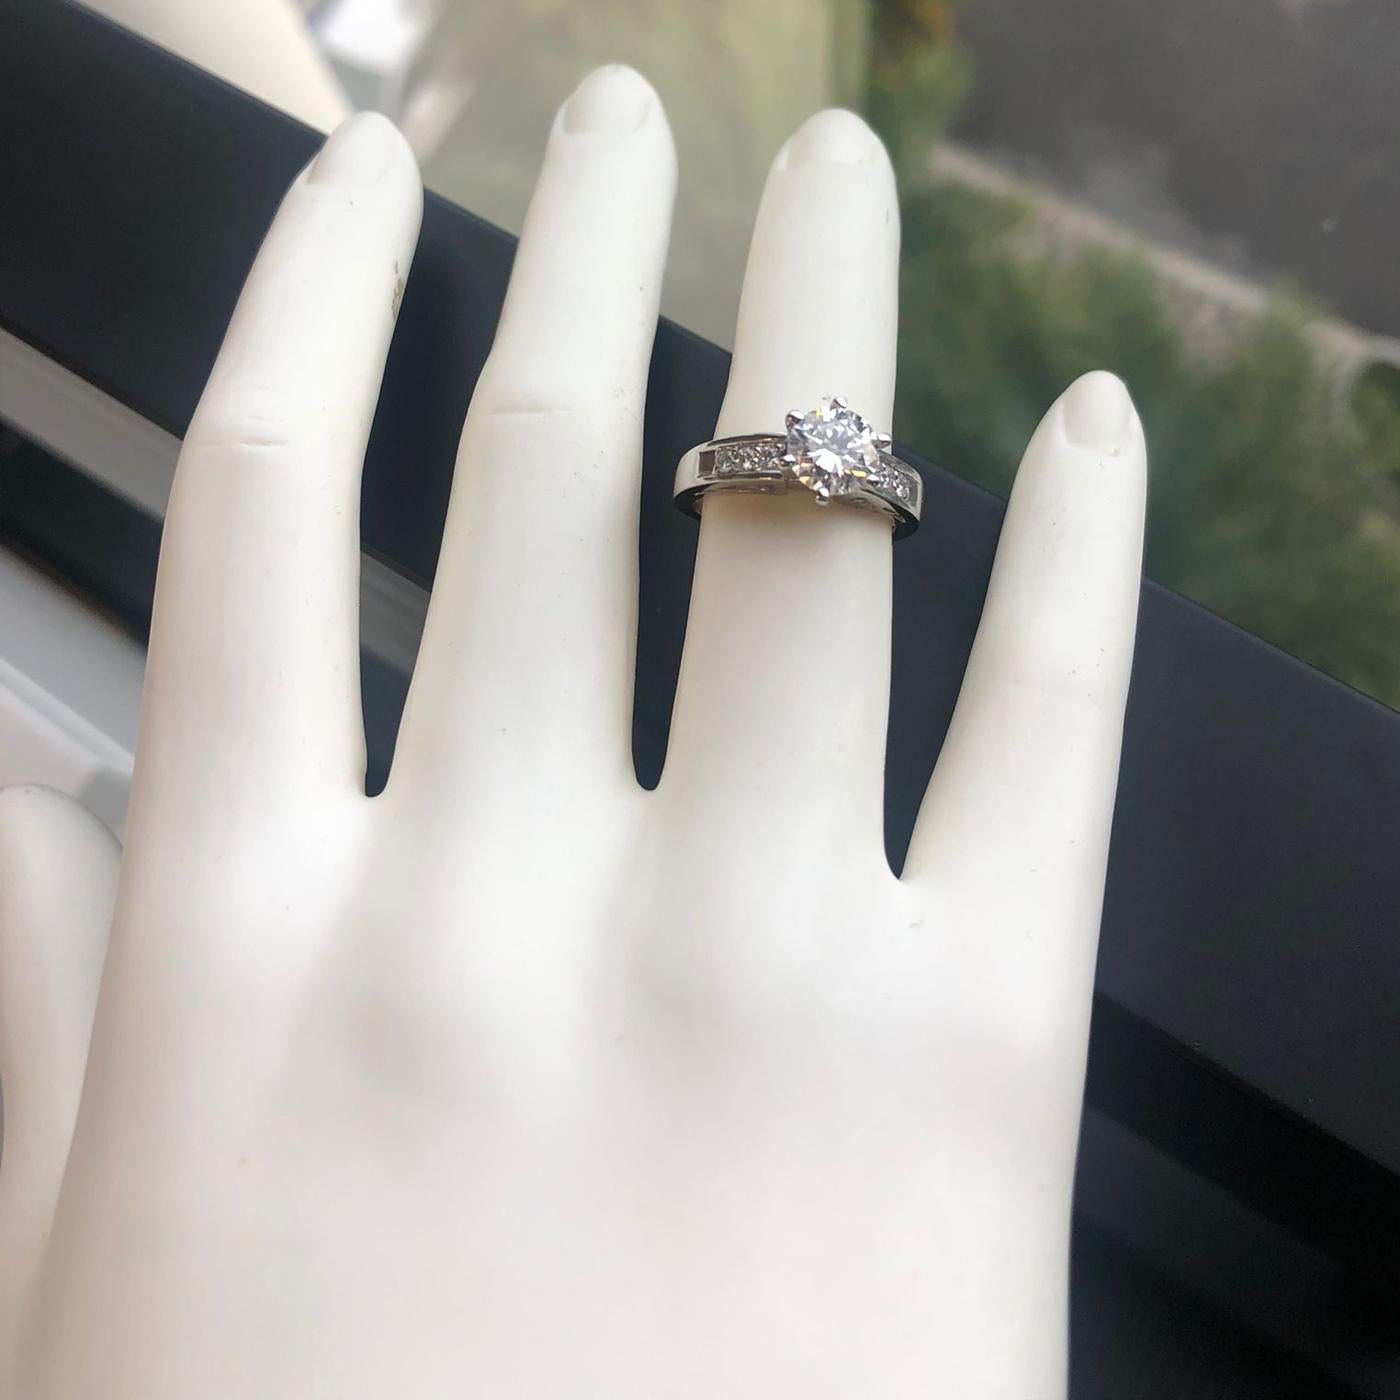 GIA Certified 1.20 Carat Round Cut Diamond Ring Si2/VS1 F Color 14K White Gold In Excellent Condition For Sale In Aventura, FL